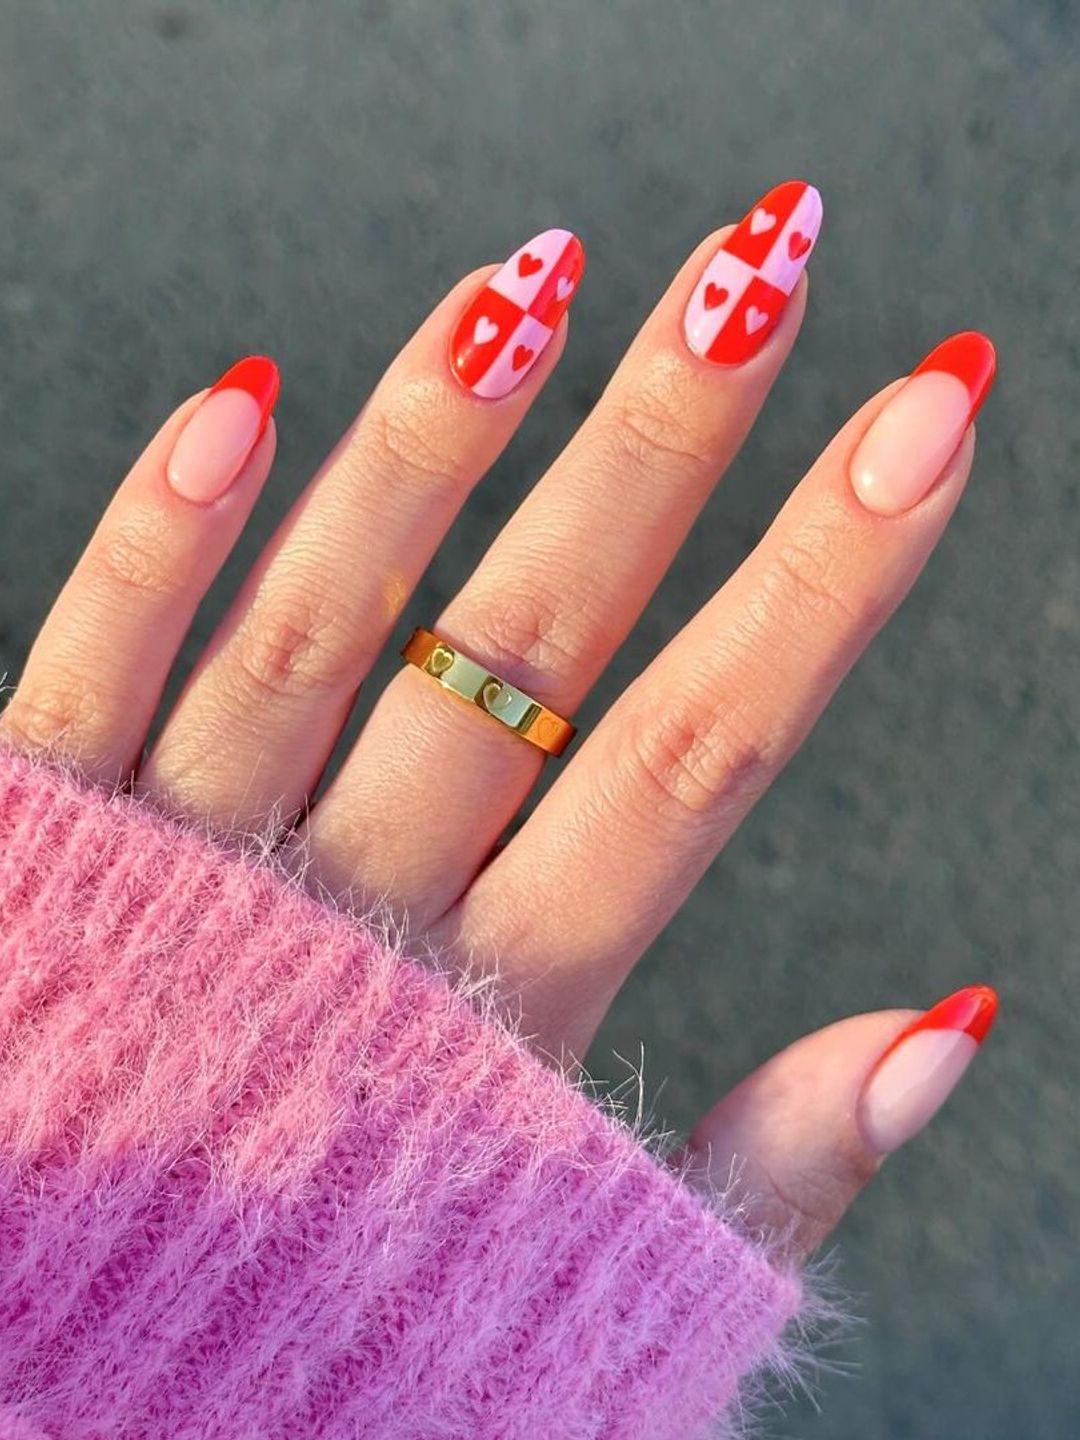 Nails with red and pink hearts and red tips 